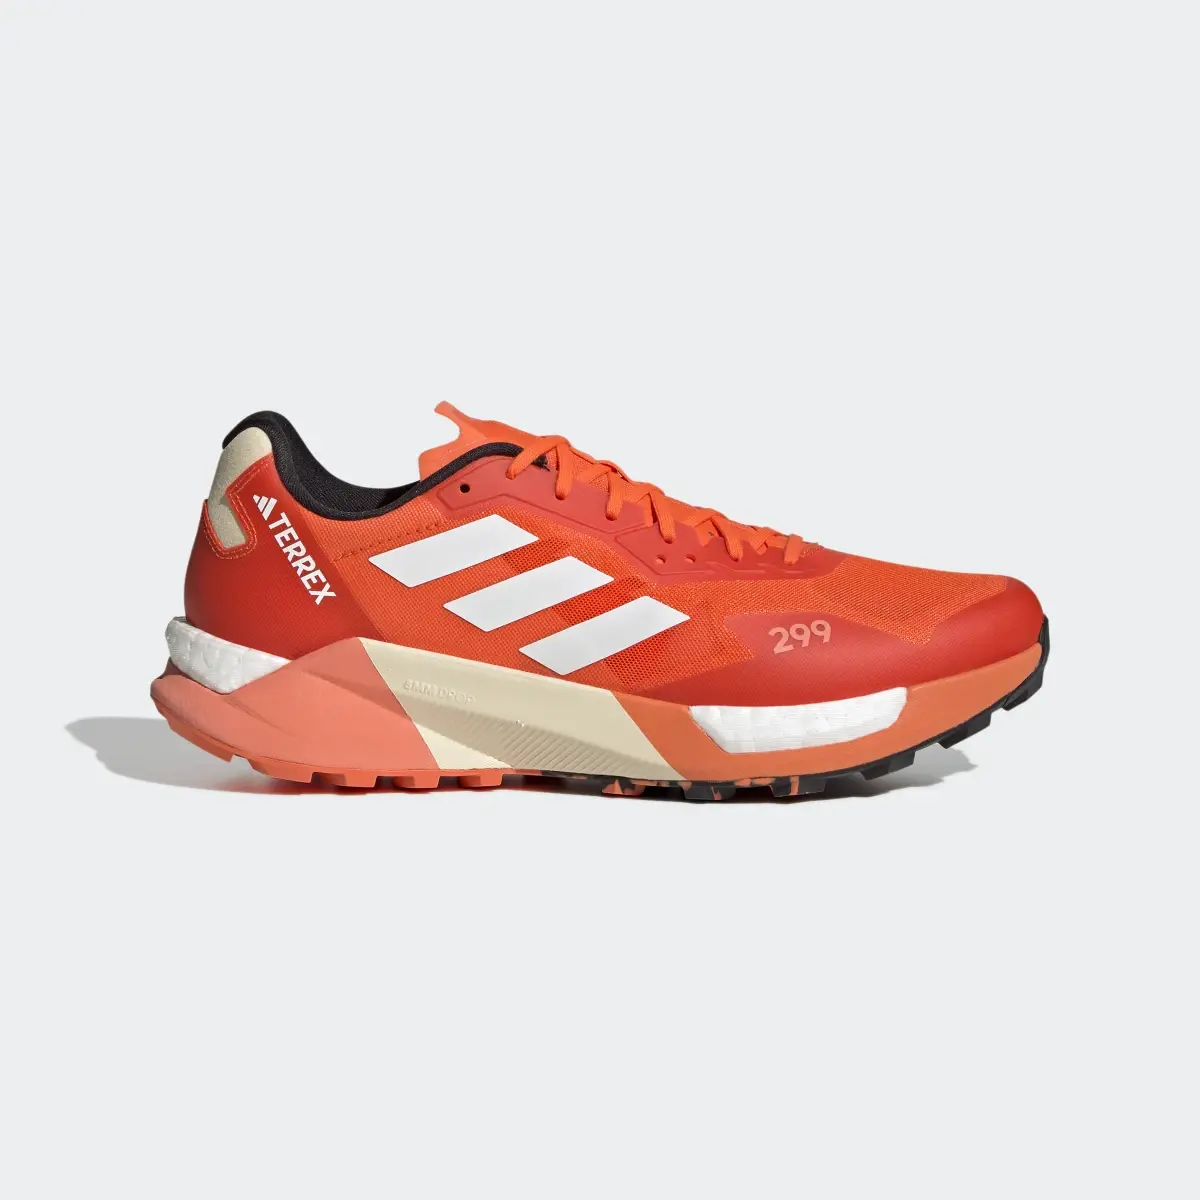 Adidas TERREX Agravic Ultra Trail Running Shoes. 2